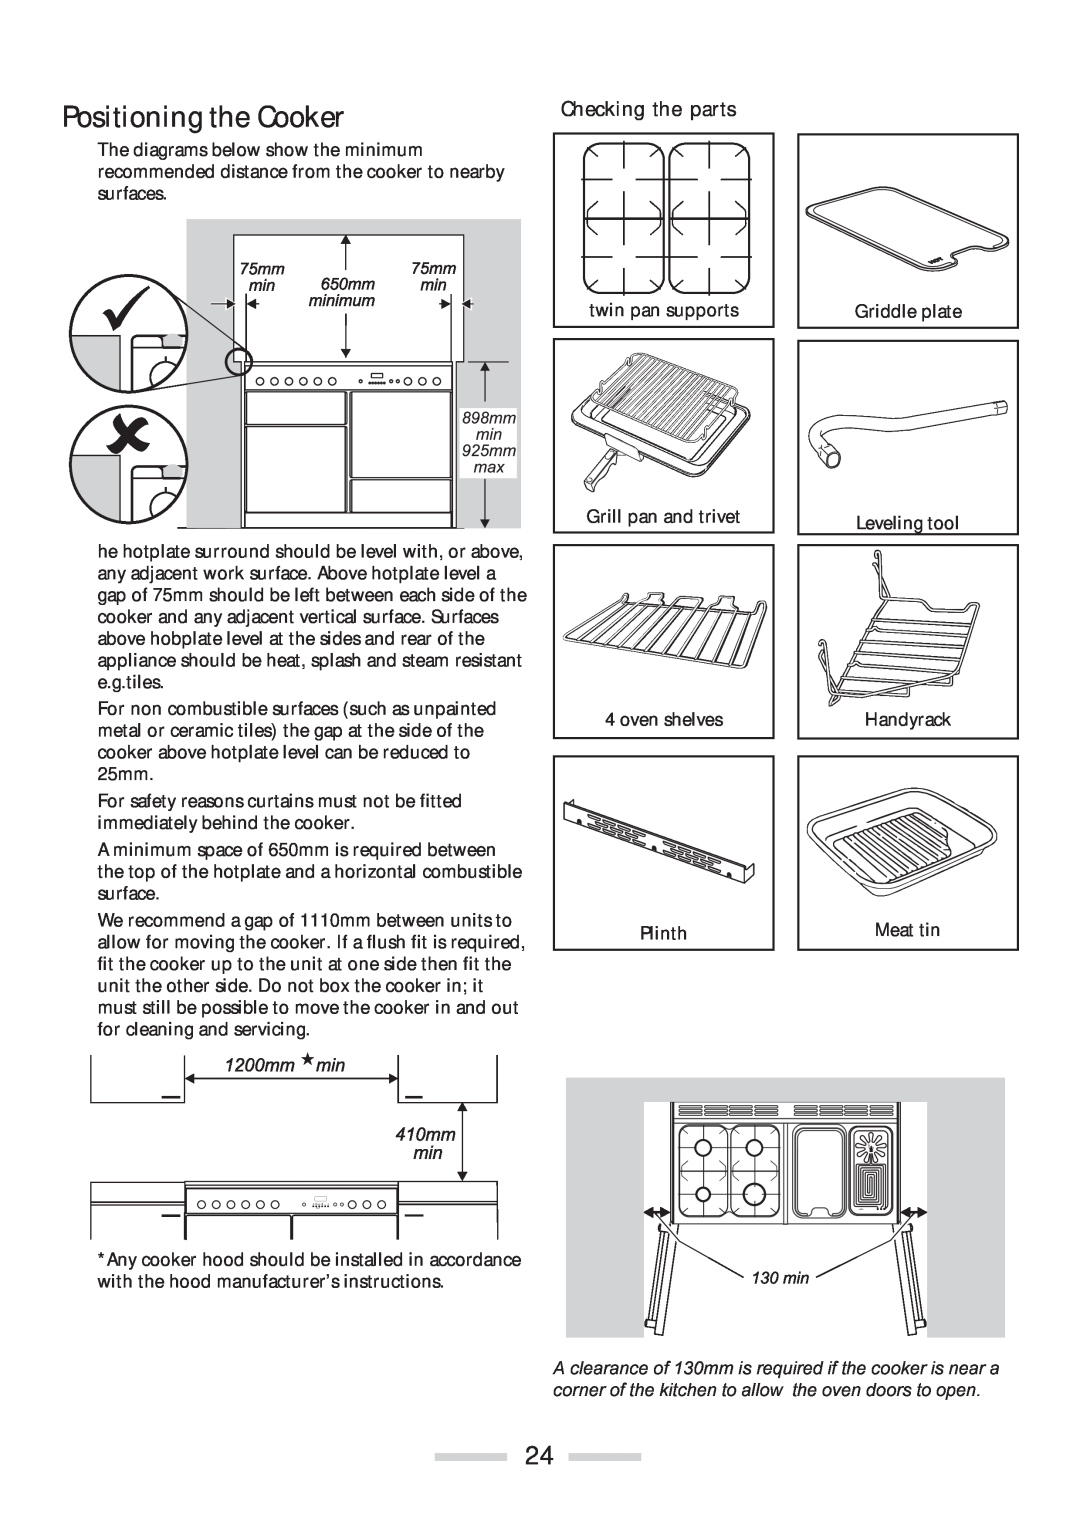 Rangemaster 110 installation instructions Positioning the Cooker, Checking the parts 